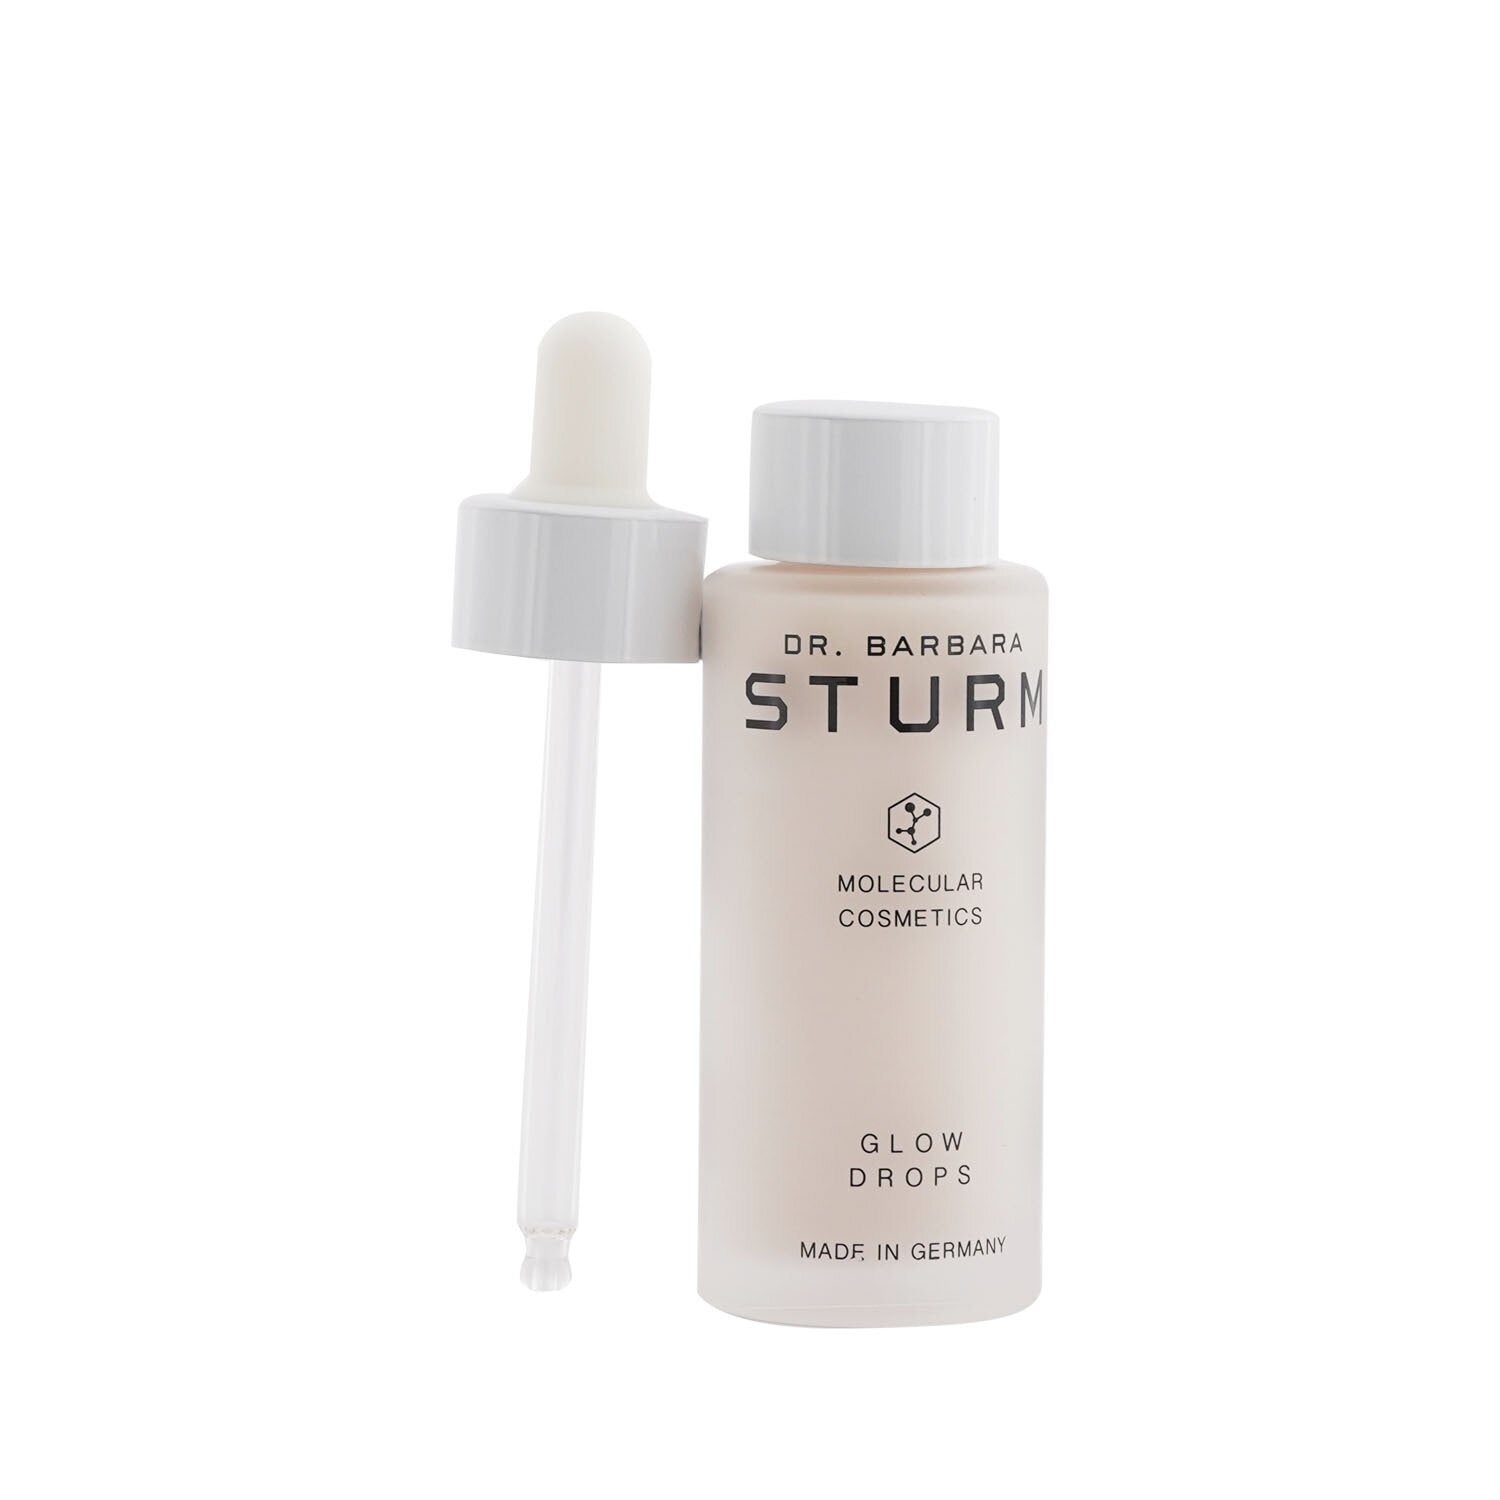 DR. BARBARA STURM - Glow Drops 32935/402068 30ml/1oz on a white background, revitalizing and brightening facial treatment.